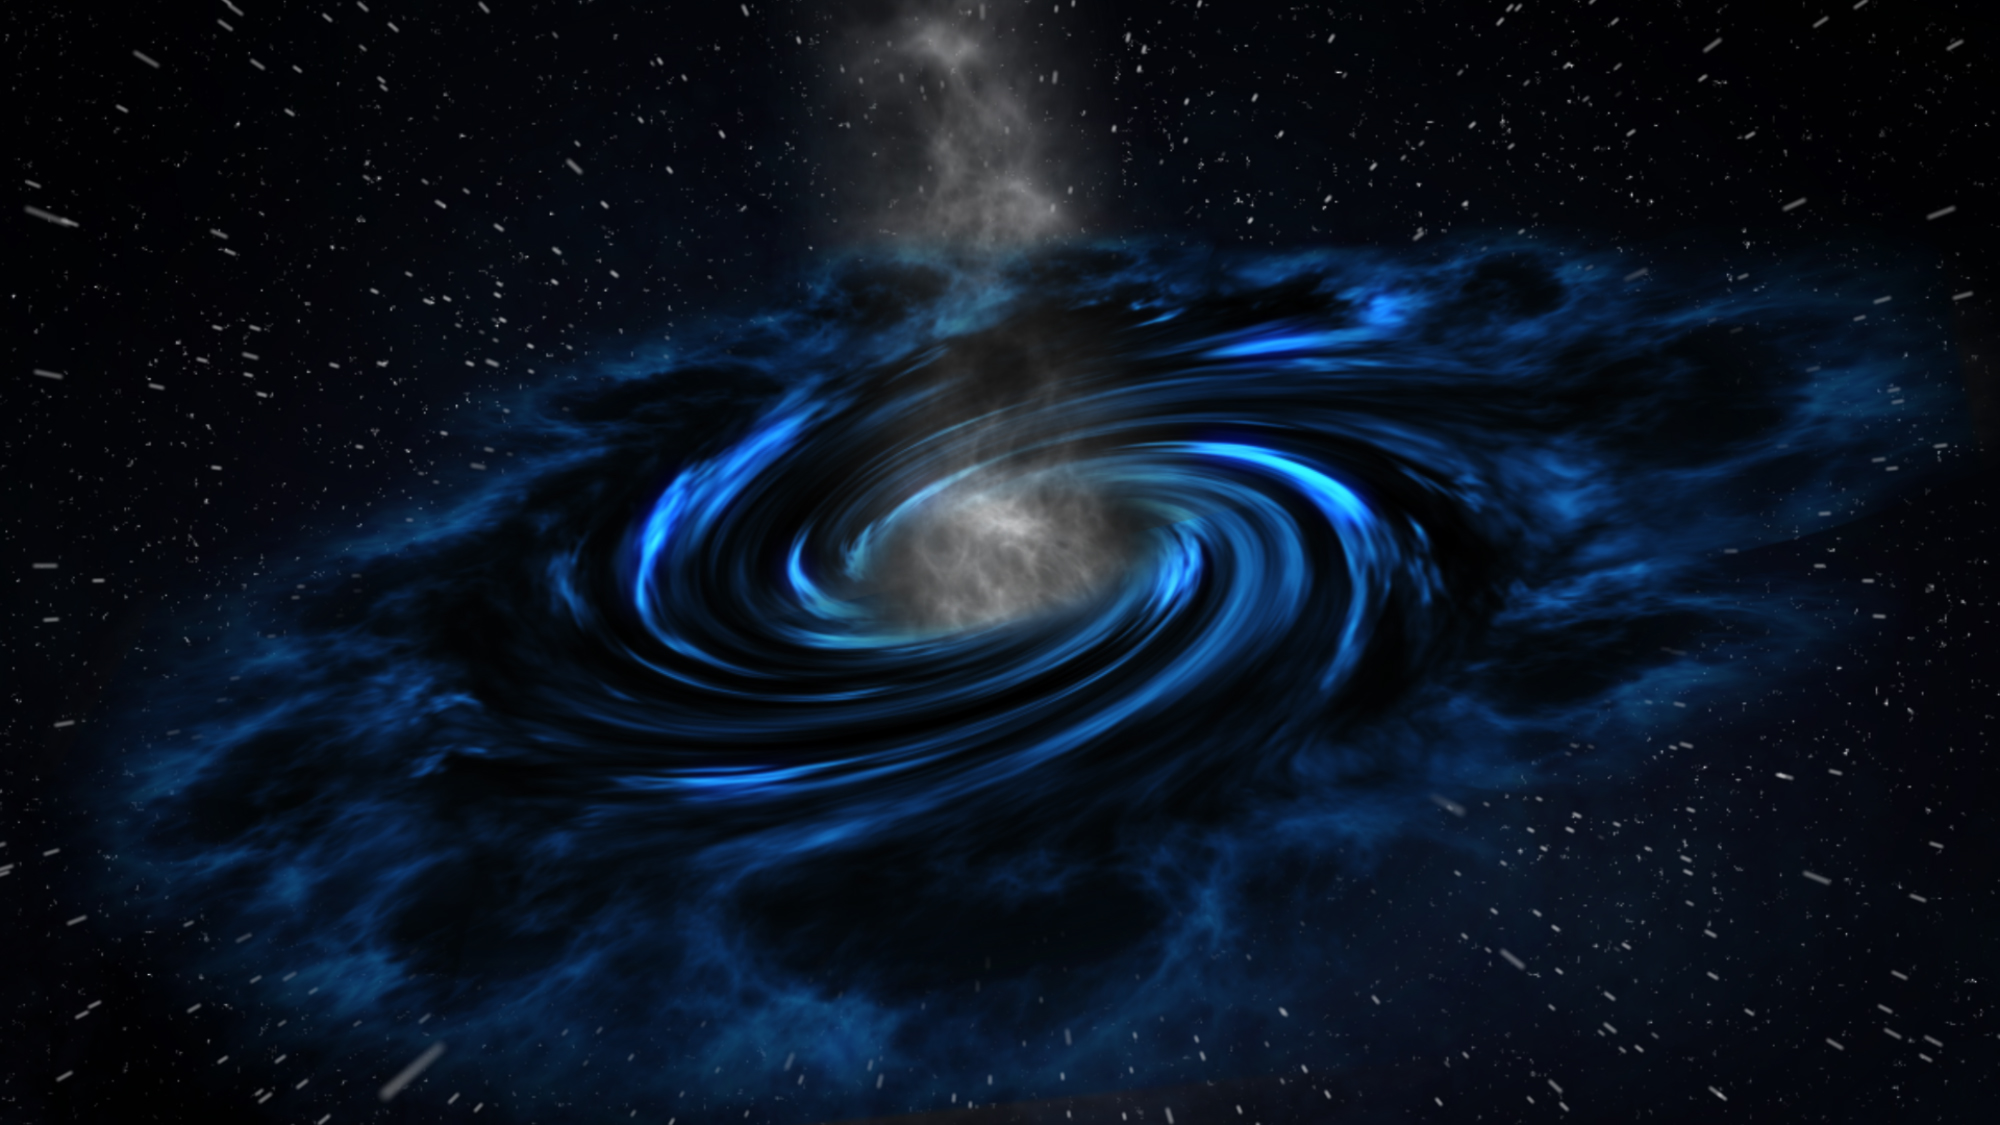 10 facts about black holes that everyone should know